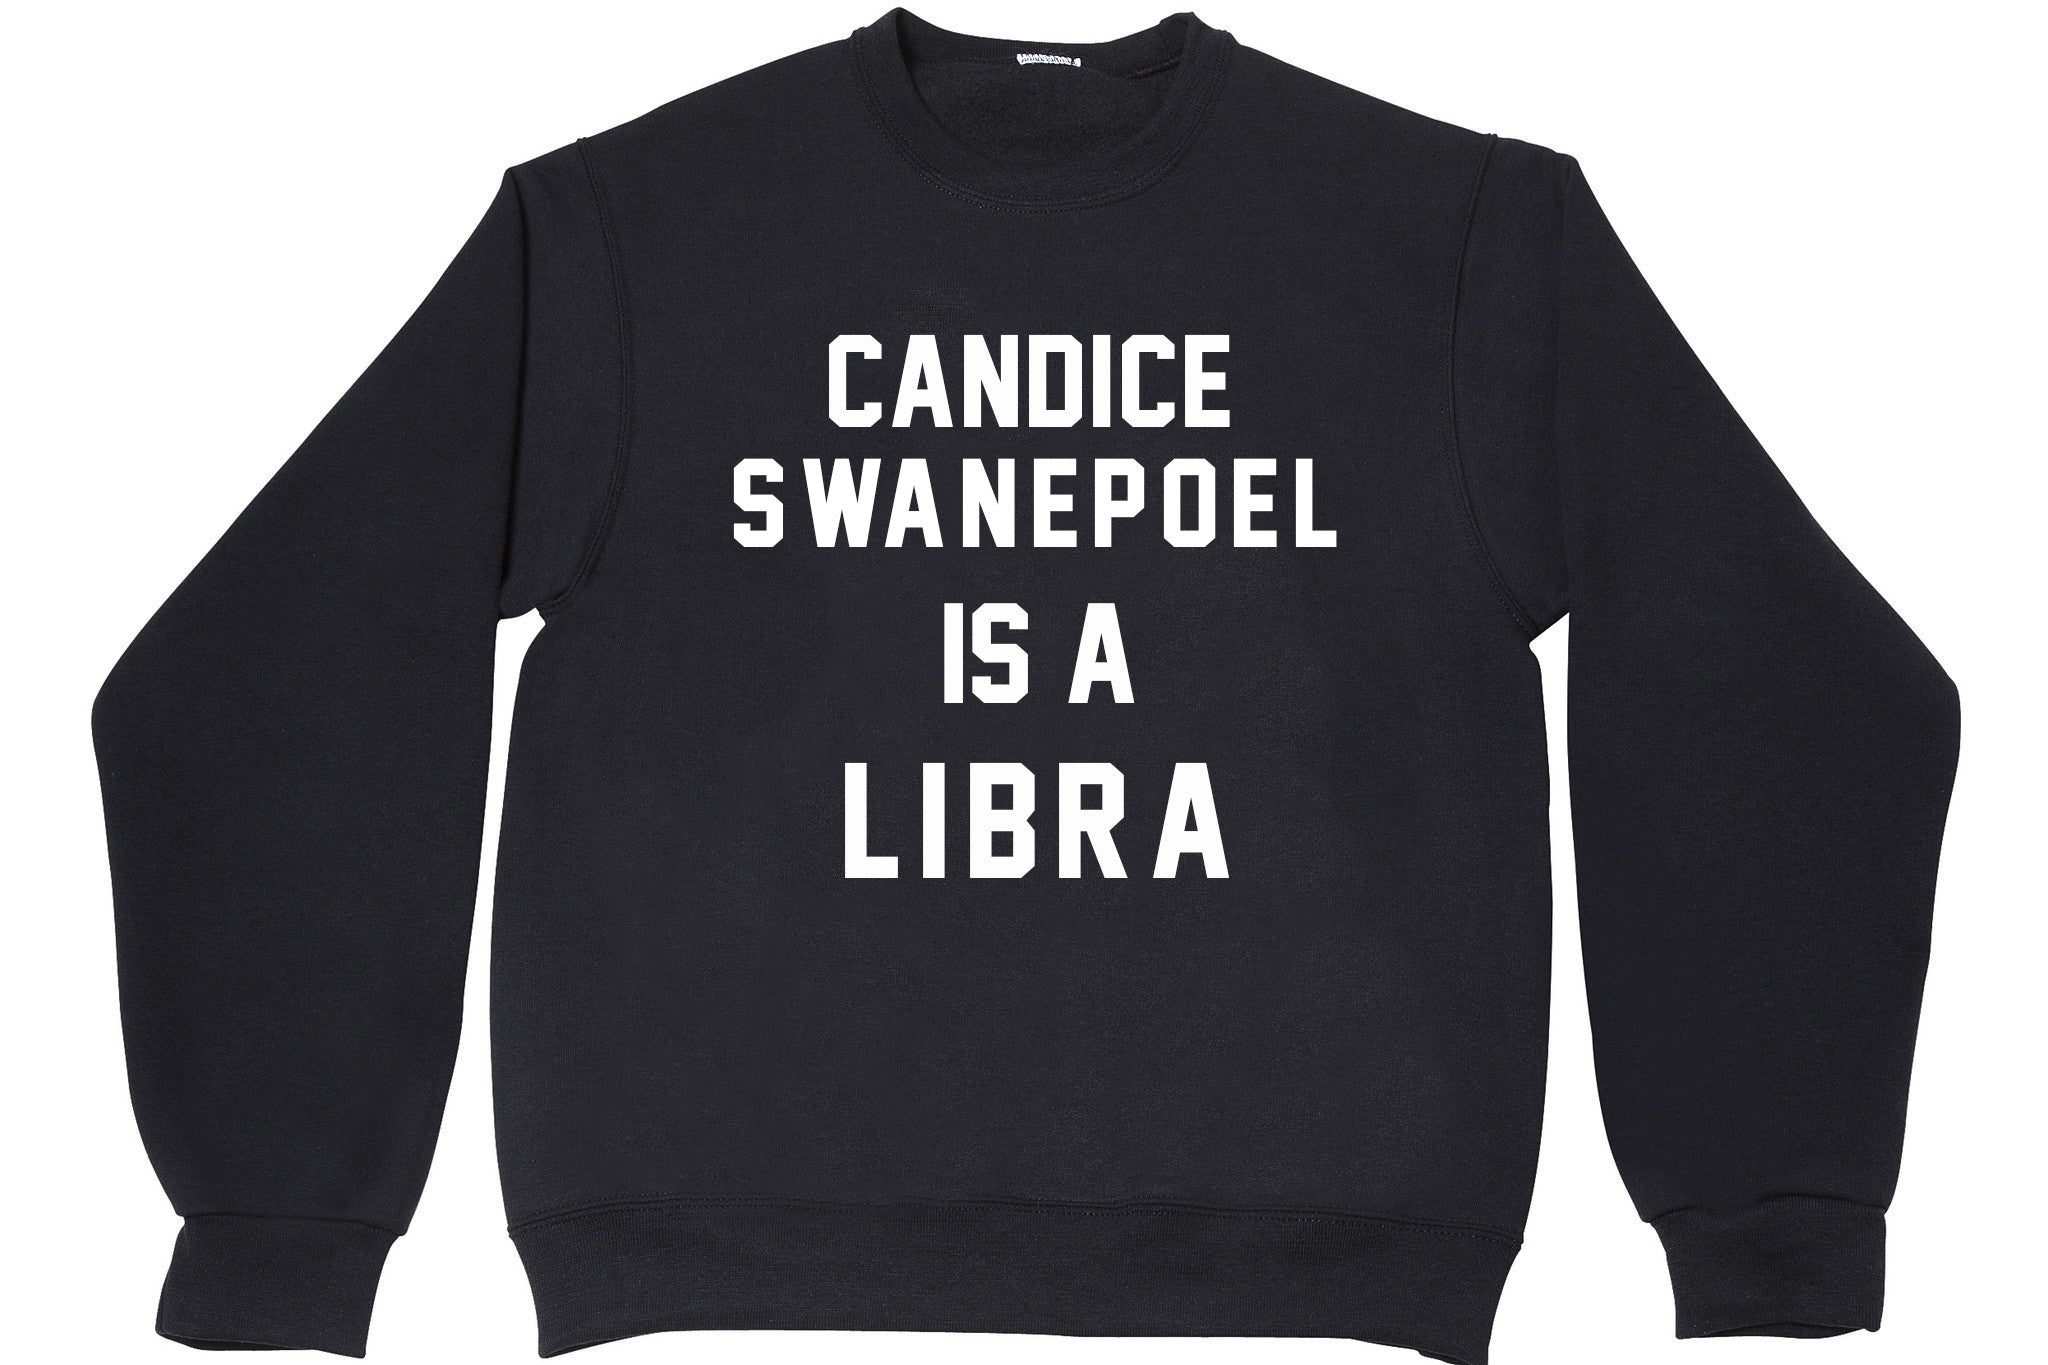 CANDICE SWANEPOEL IS A LIBRA